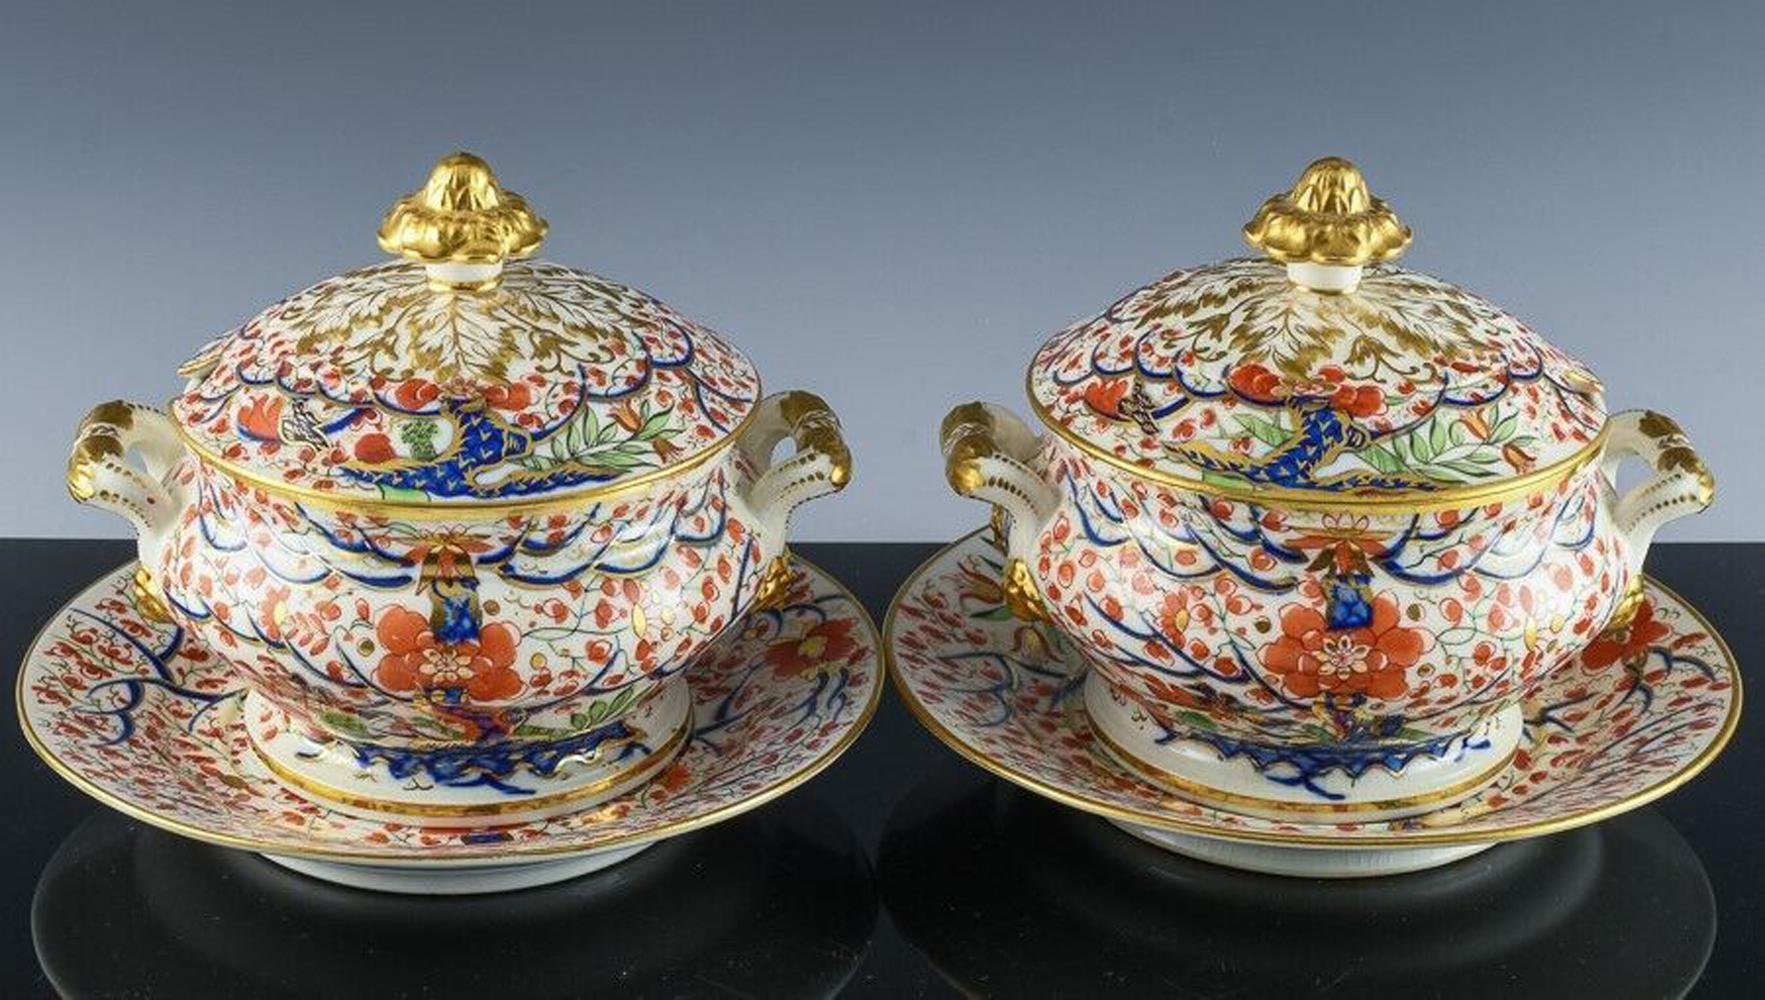 Chamberlain Worcester Porcelain Pair of Sauce Tureens, Covers and Stands,
Tree of Life Pattern,
Circa 1818-22.

The Chamberlain Worcester porcelain circular sauce tureens, covers, and stands are painted in an ornate and colorful pattern known as the